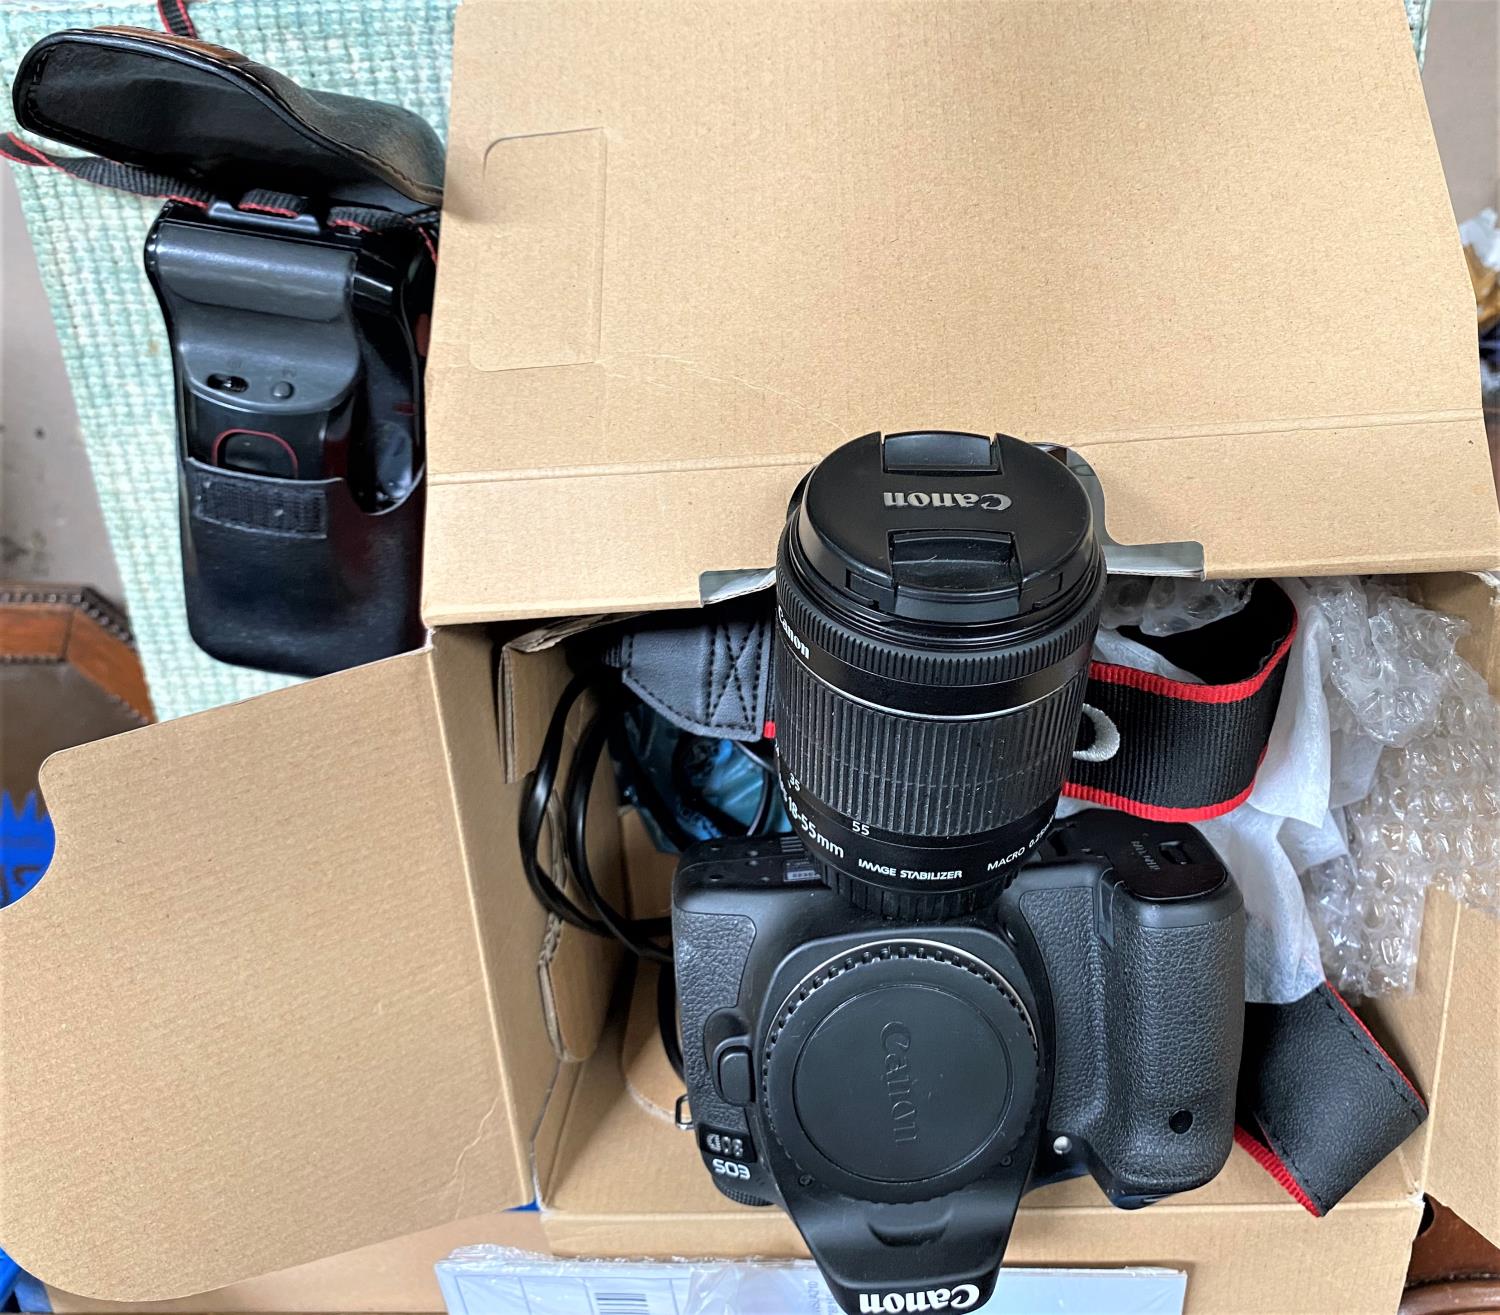 A Canon EO5 80D digital SLR camera, in original box with 18-55mm 15STM lens and another Canon camera